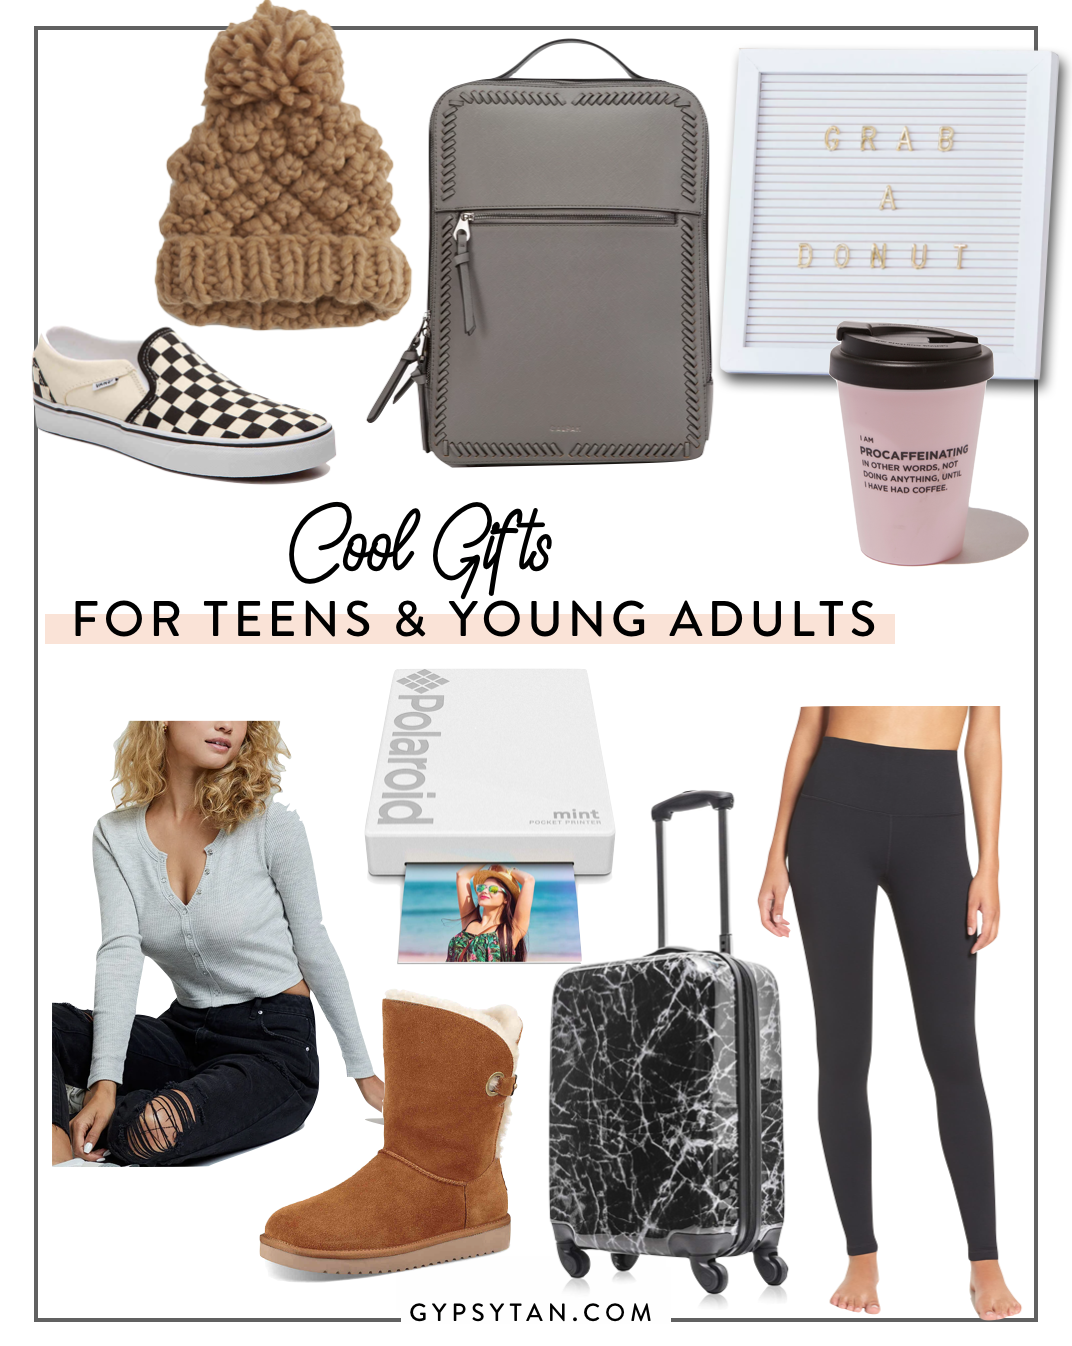 Gift Guide for Teens and Young Adults - Christmas Gift Guide 2019